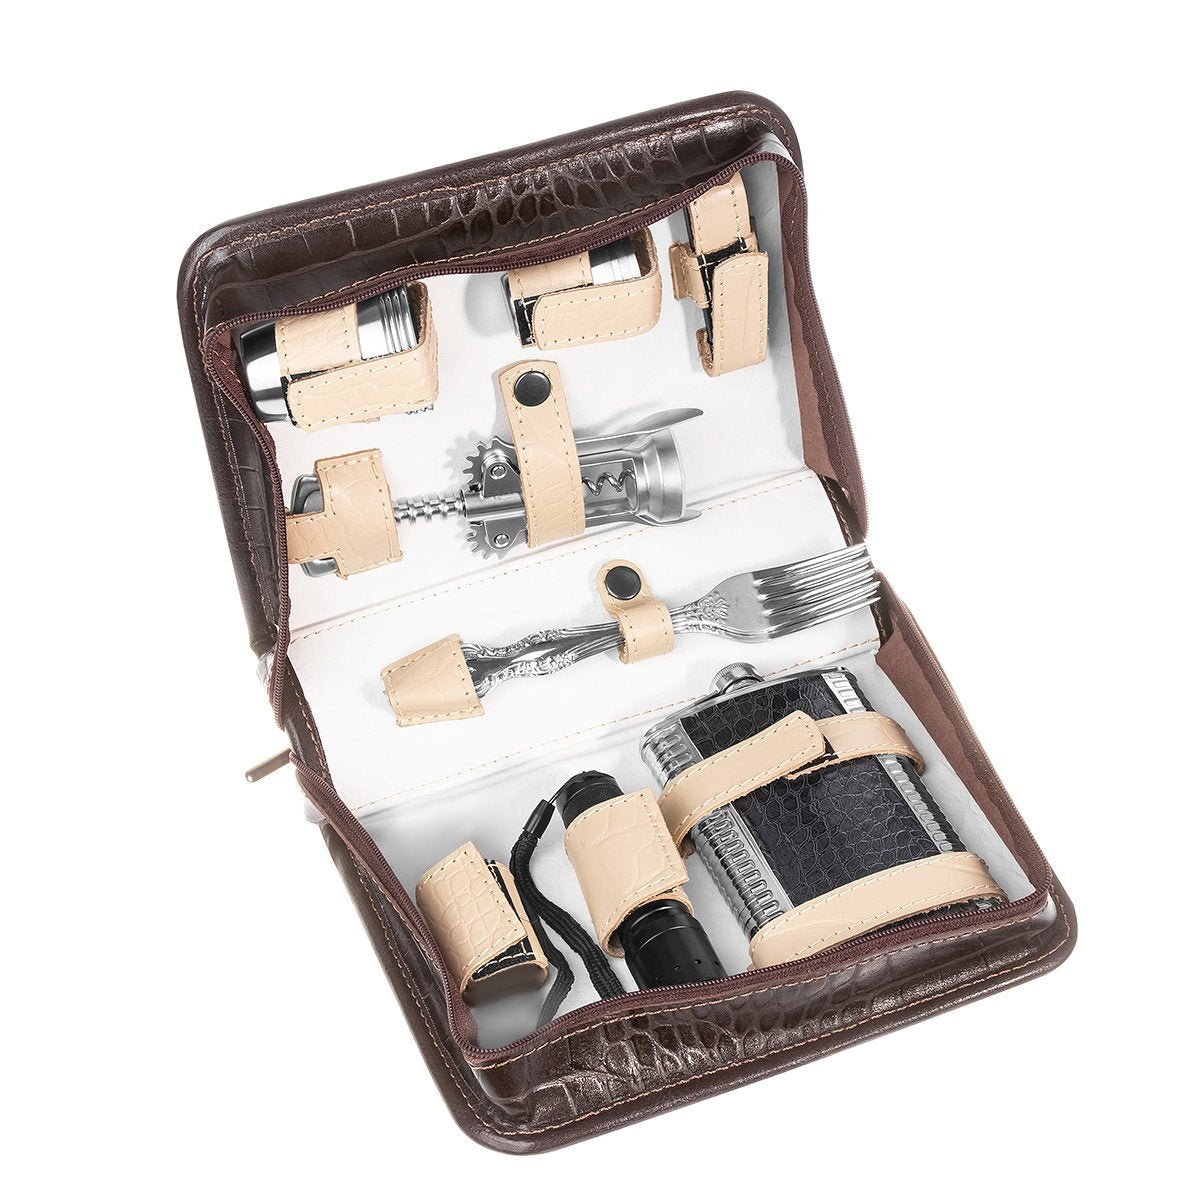 Elegant Picnic Gift Set for 4 Persons in Genuine Leather Case